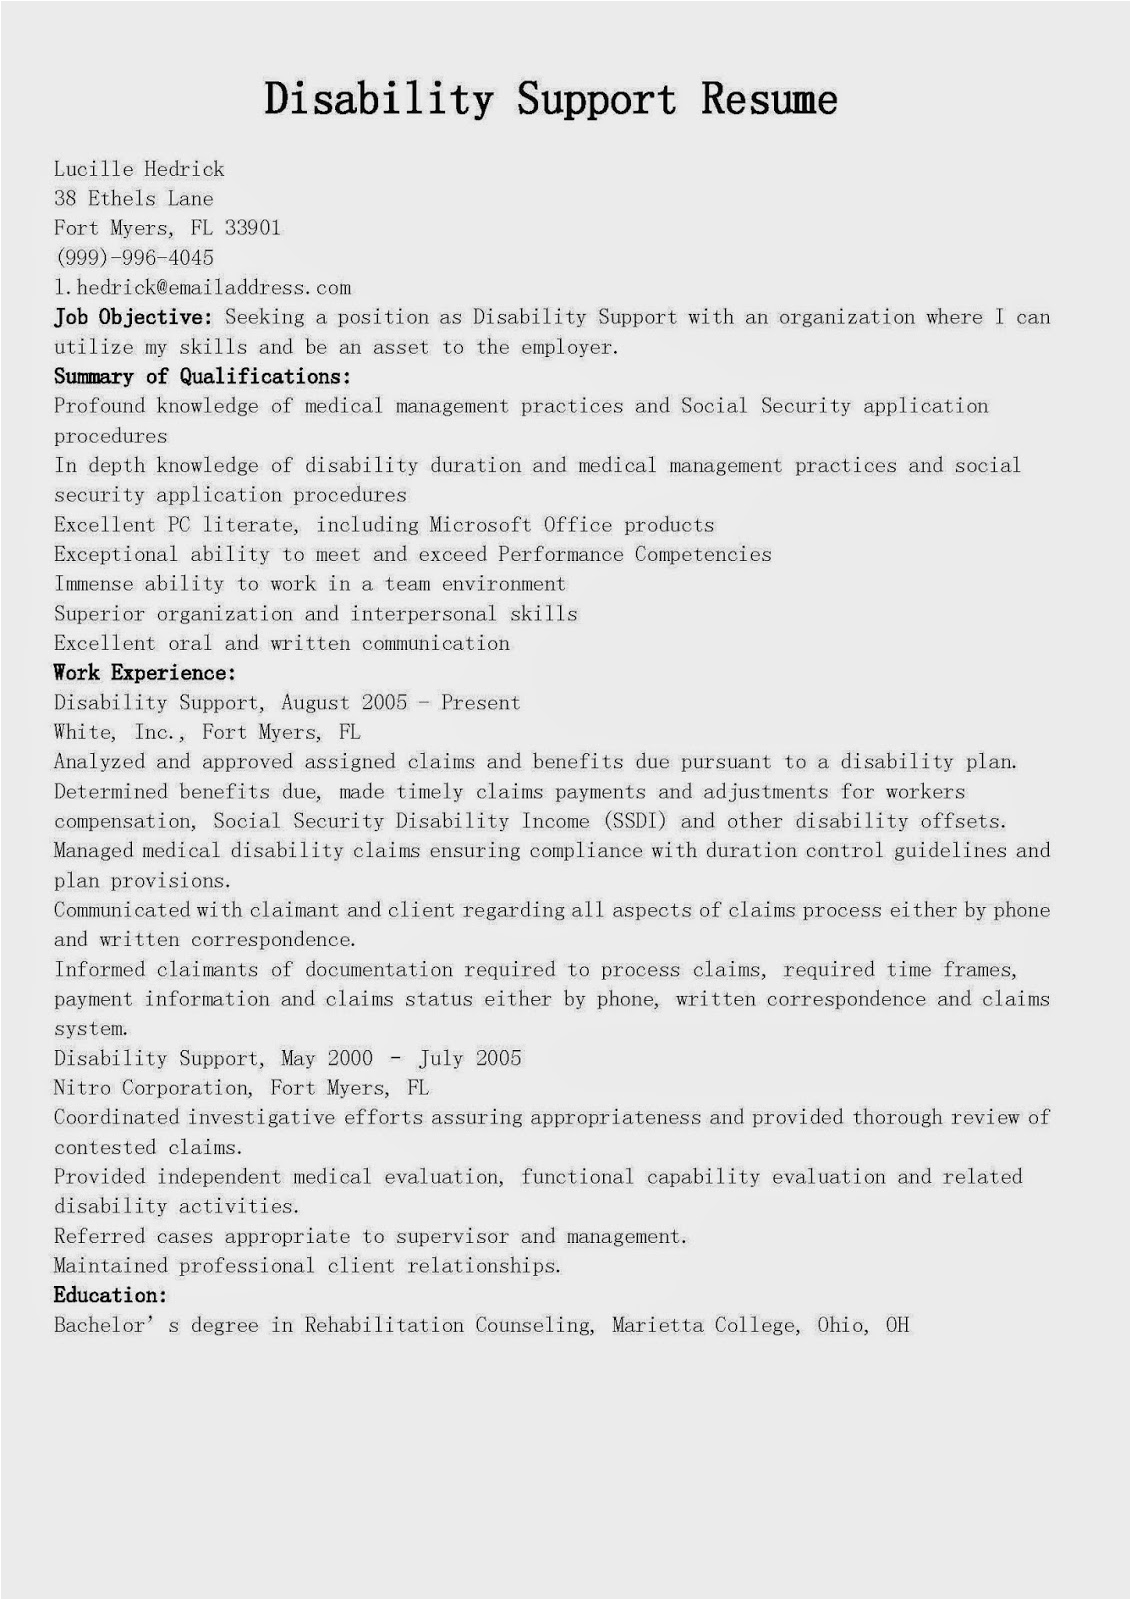 Sample Resume for Working with Developmental Disabilities Resume Samples Disability Support Resume Sample